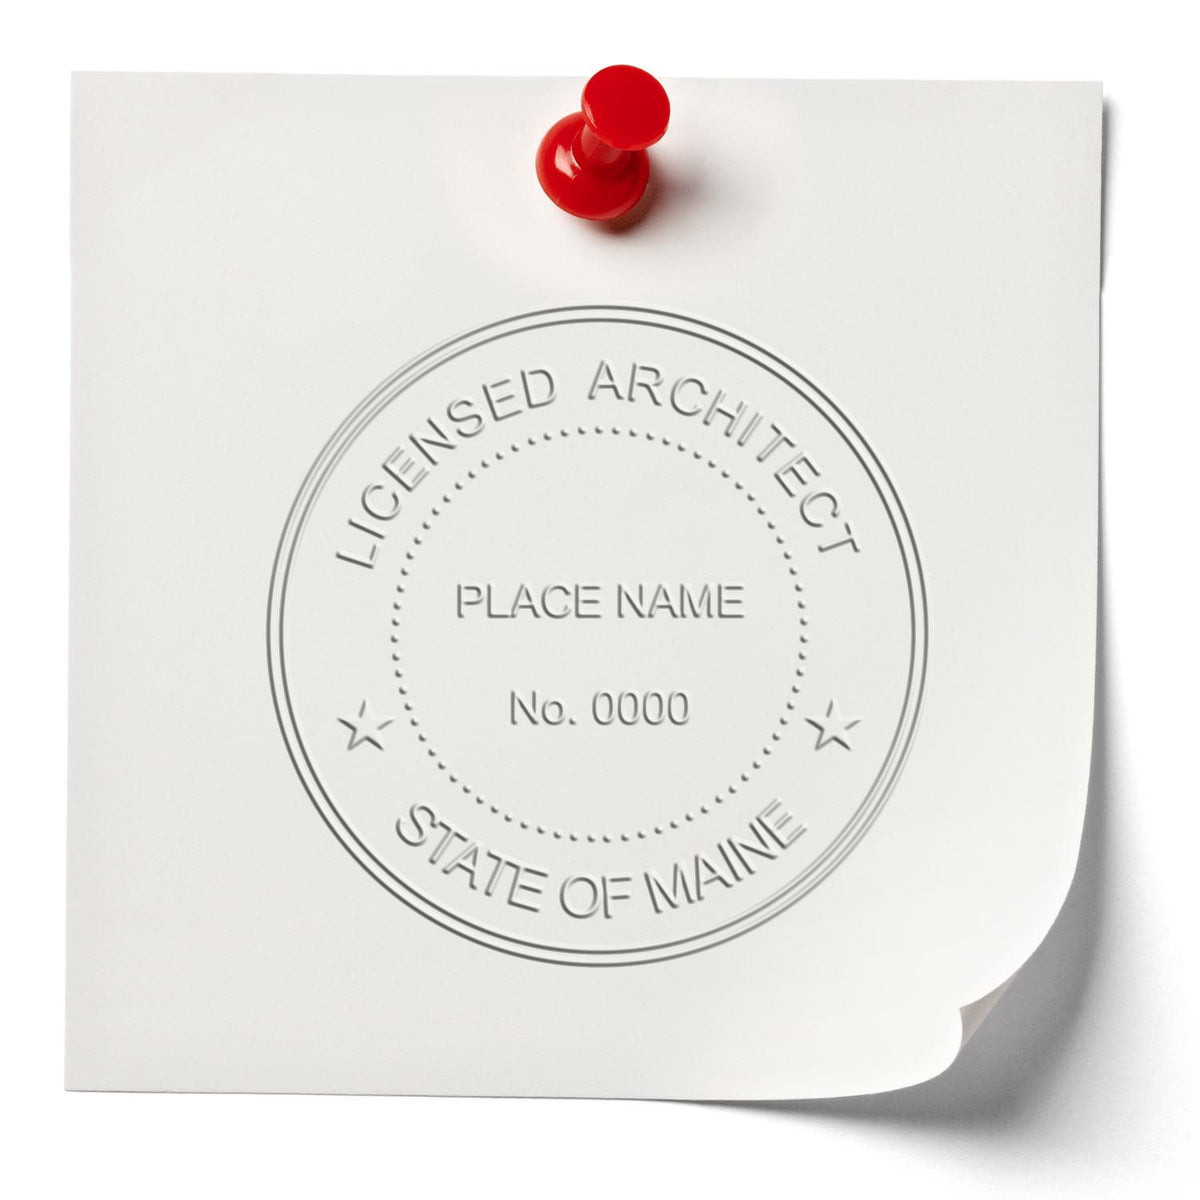 A stamped imprint of the Gift Maine Architect Seal in this stylish lifestyle photo, setting the tone for a unique and personalized product.